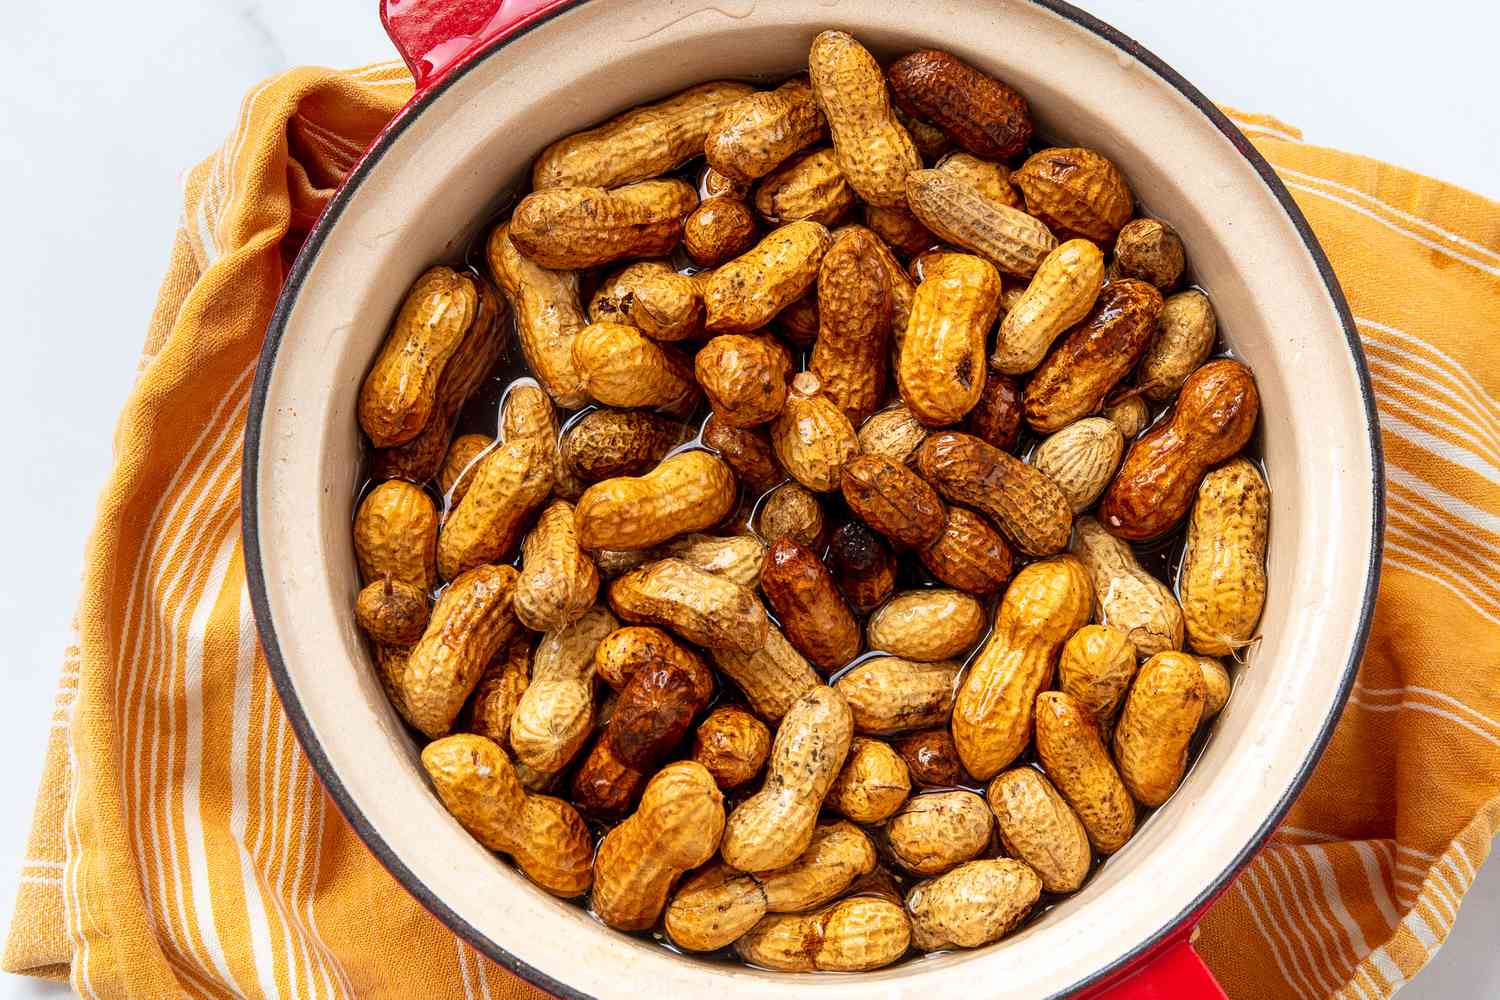 https://storables.com/wp-content/uploads/2023/09/how-to-store-boiled-peanuts-1694153318.jpg